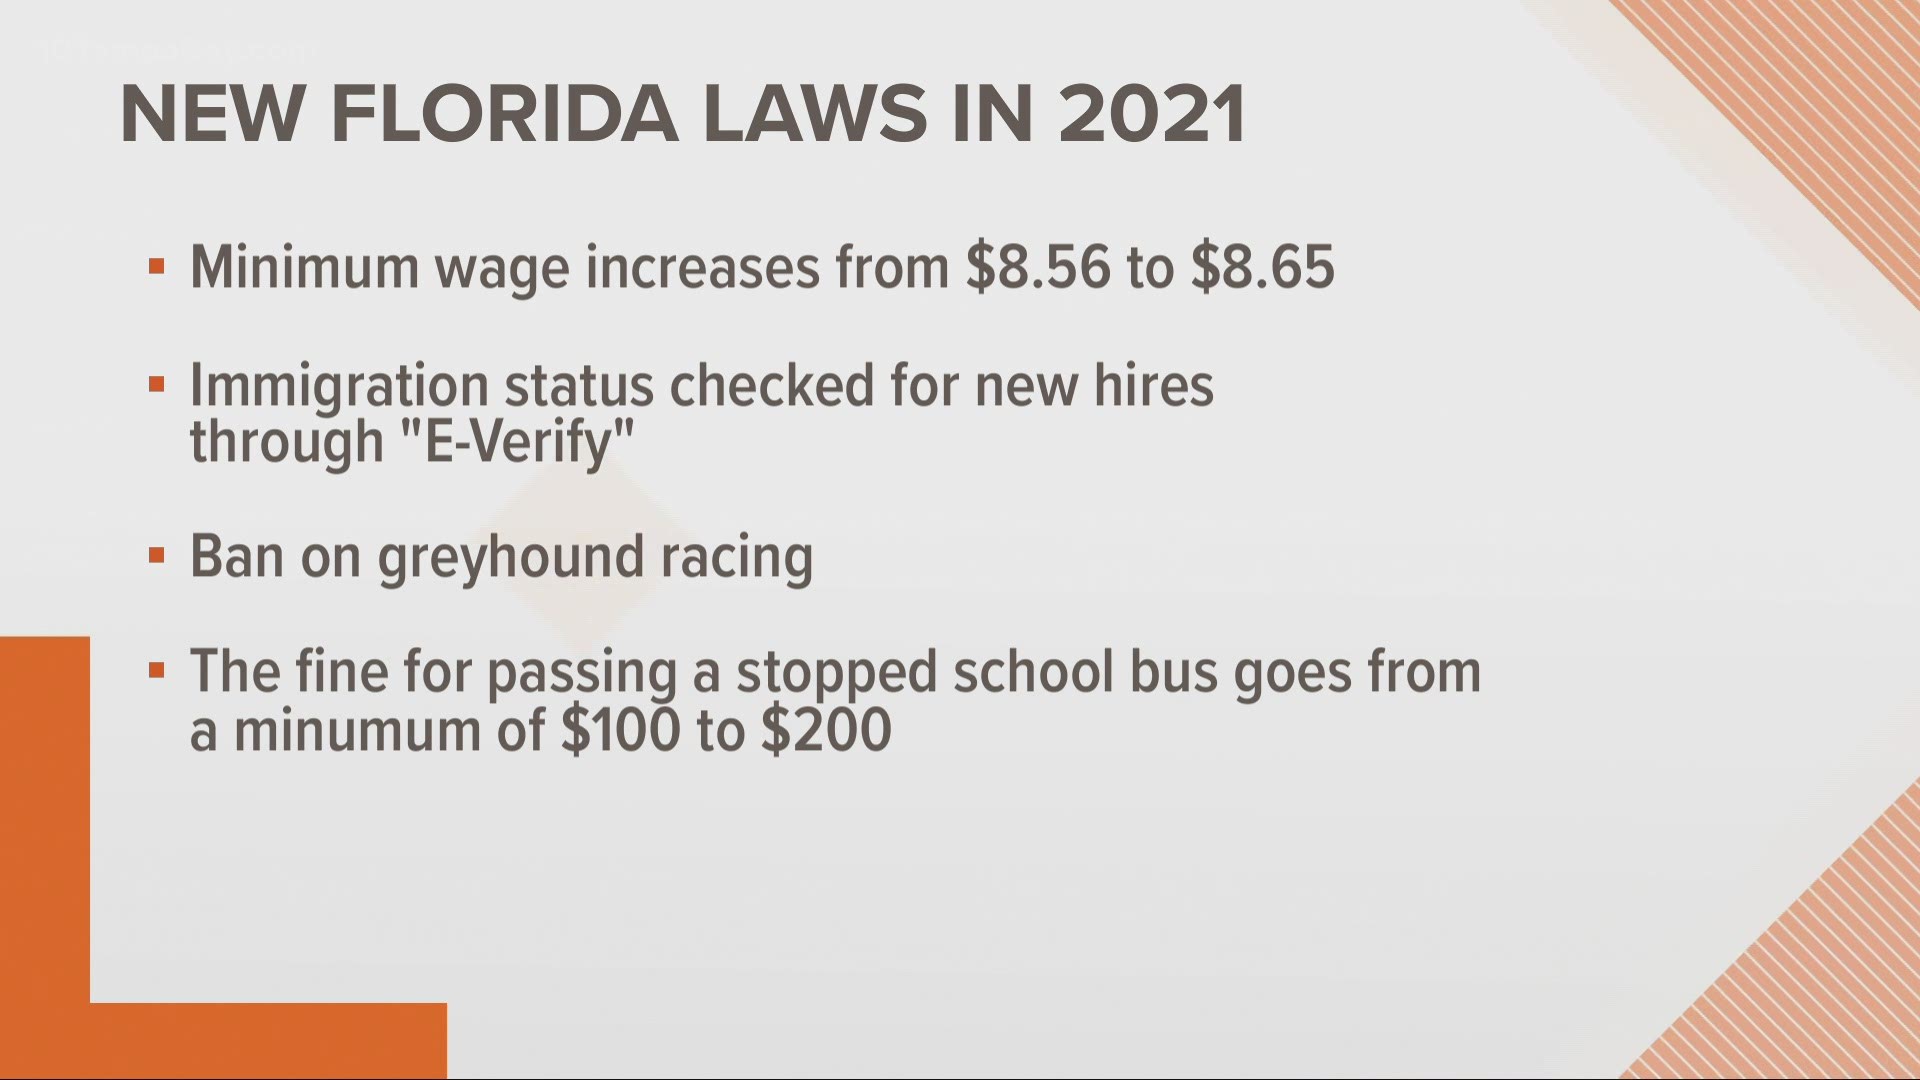 New Florida laws What Florida laws are changing in 2021